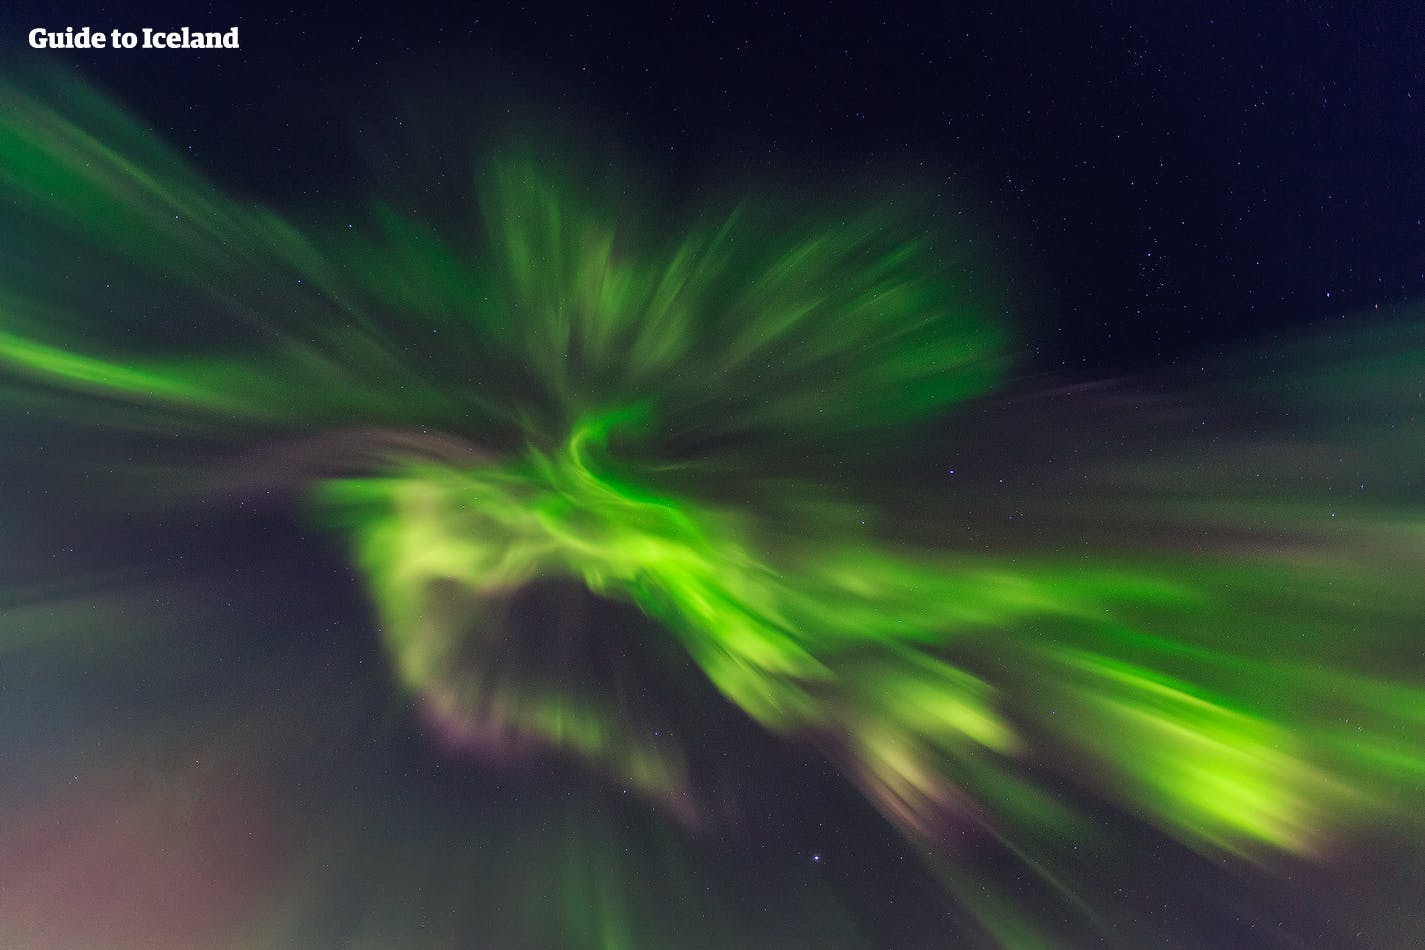 Marvel over the aurora borealis from the top of Mount Esja in West Iceland.